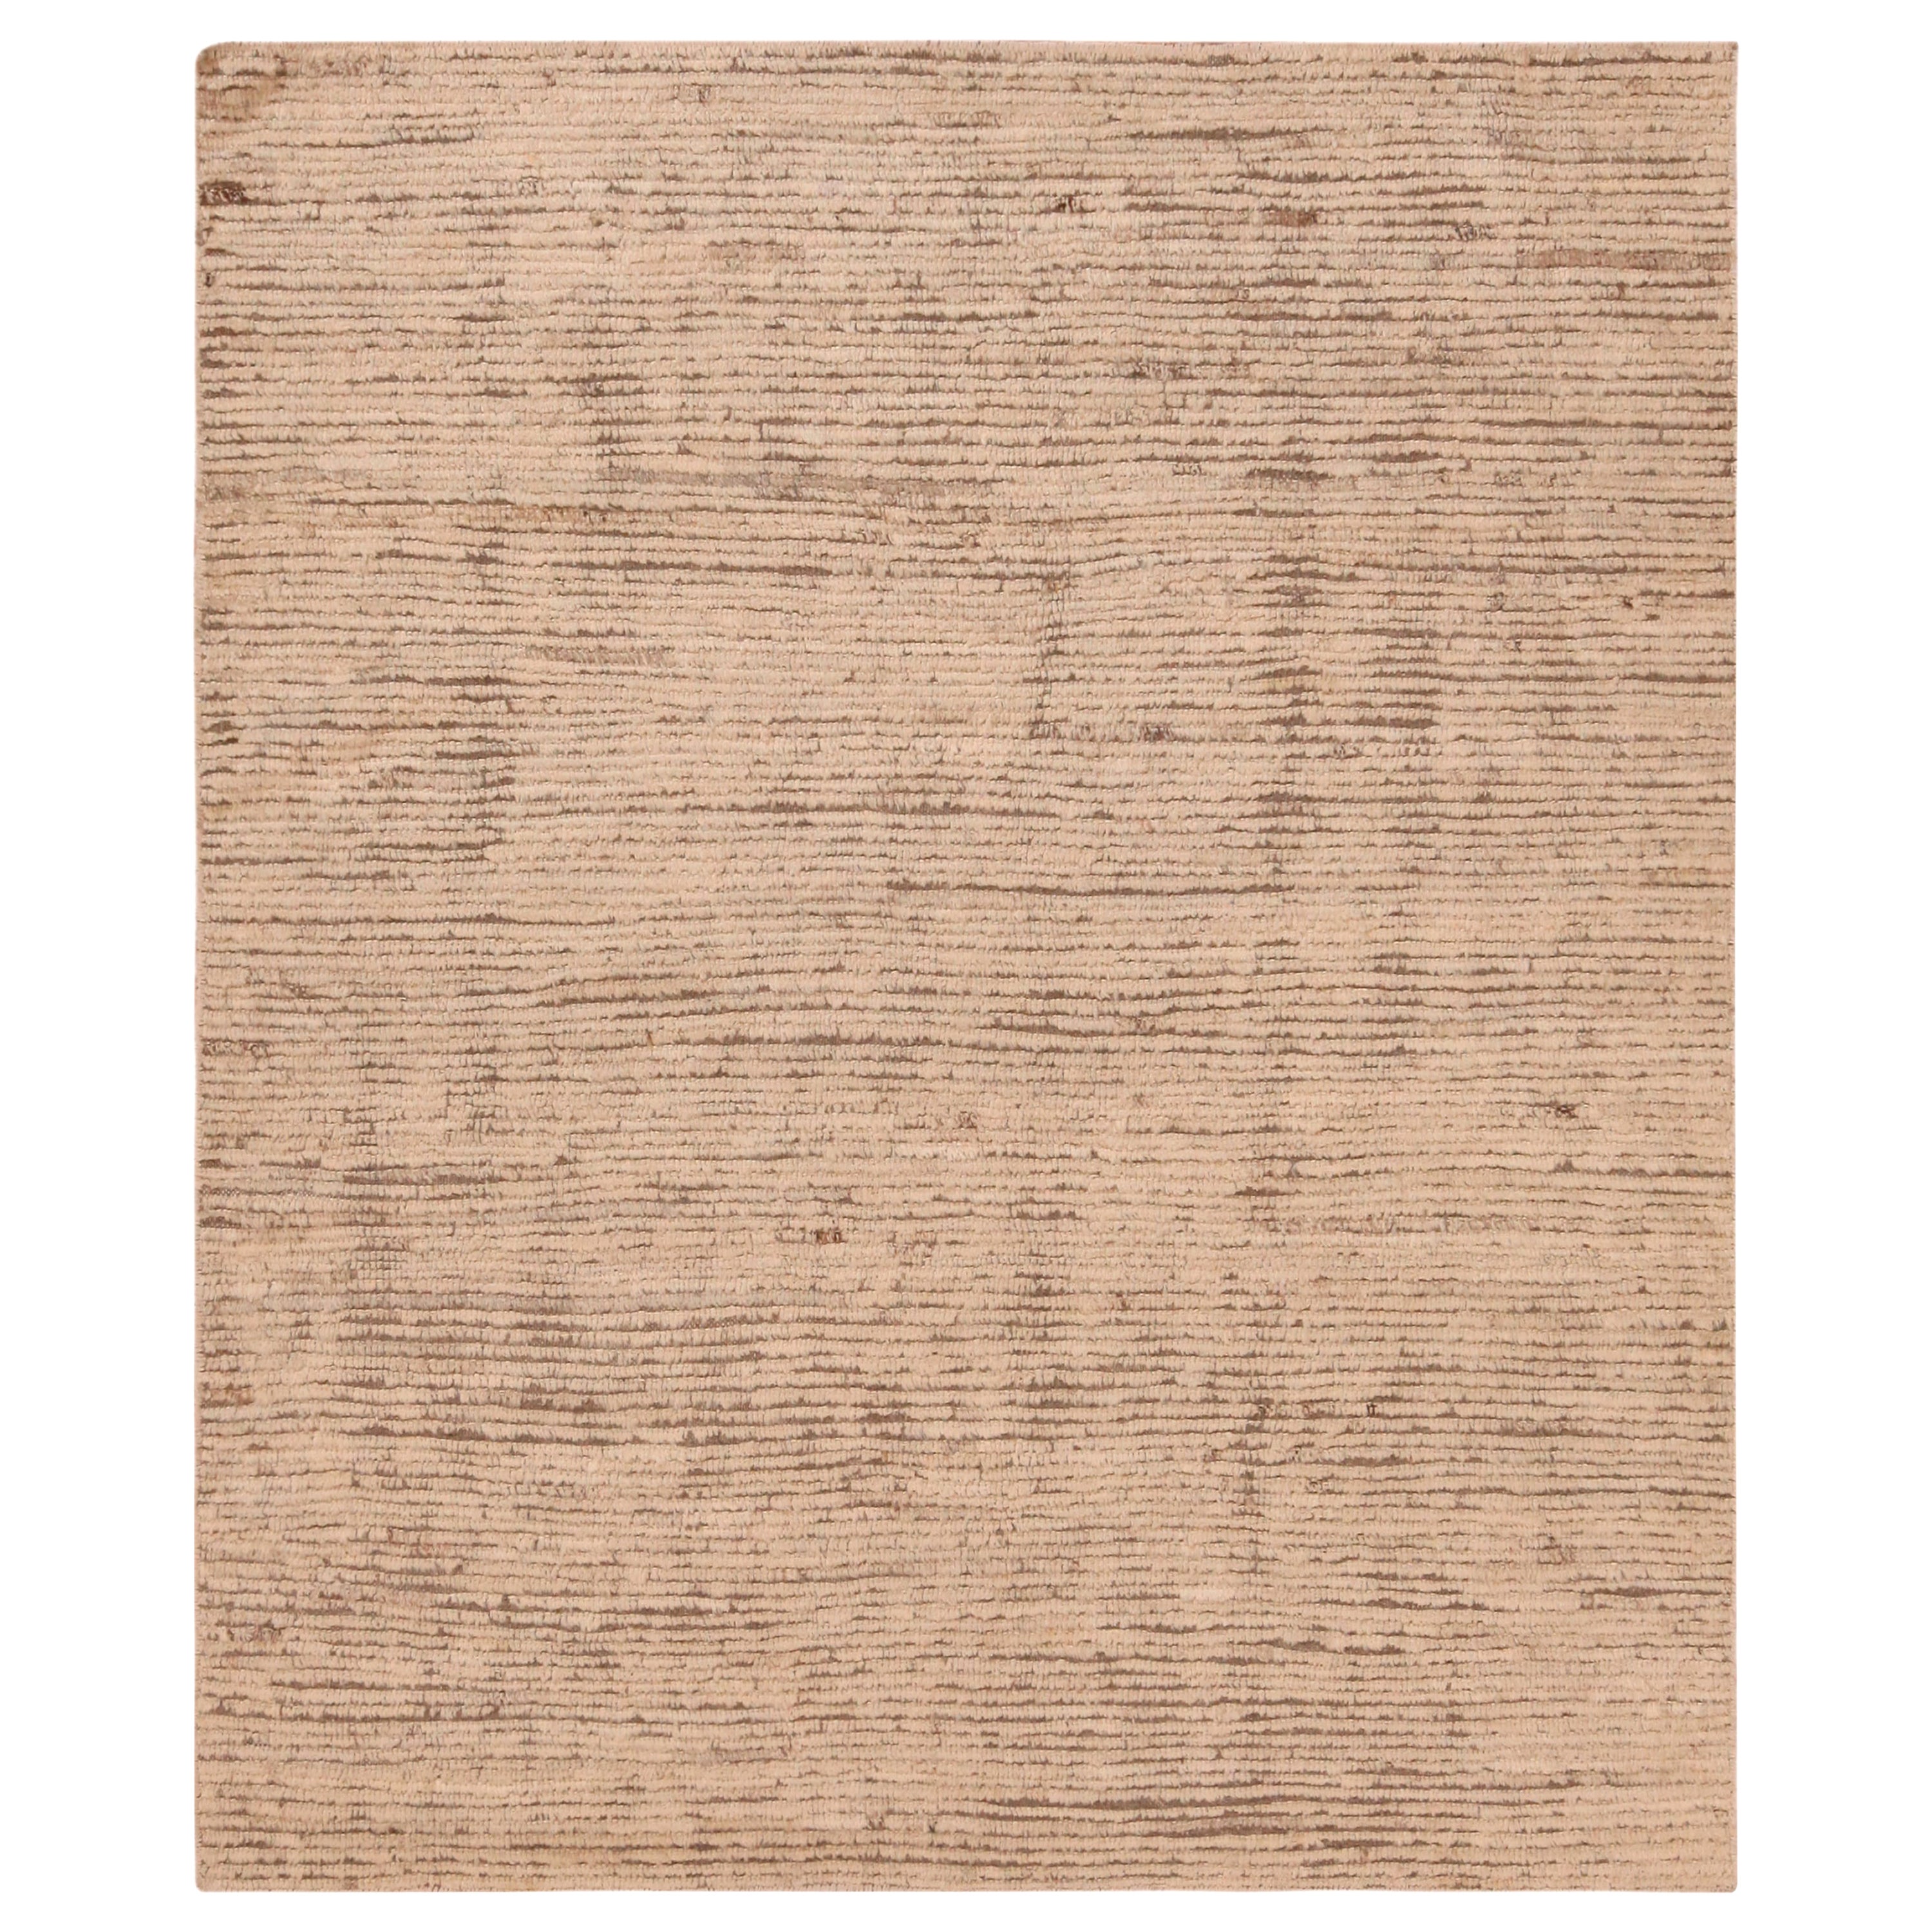 Nazmiyal Collection Modern Moroccan Style Area Rug. 4 ft 11 in x 5 ft 11 in For Sale